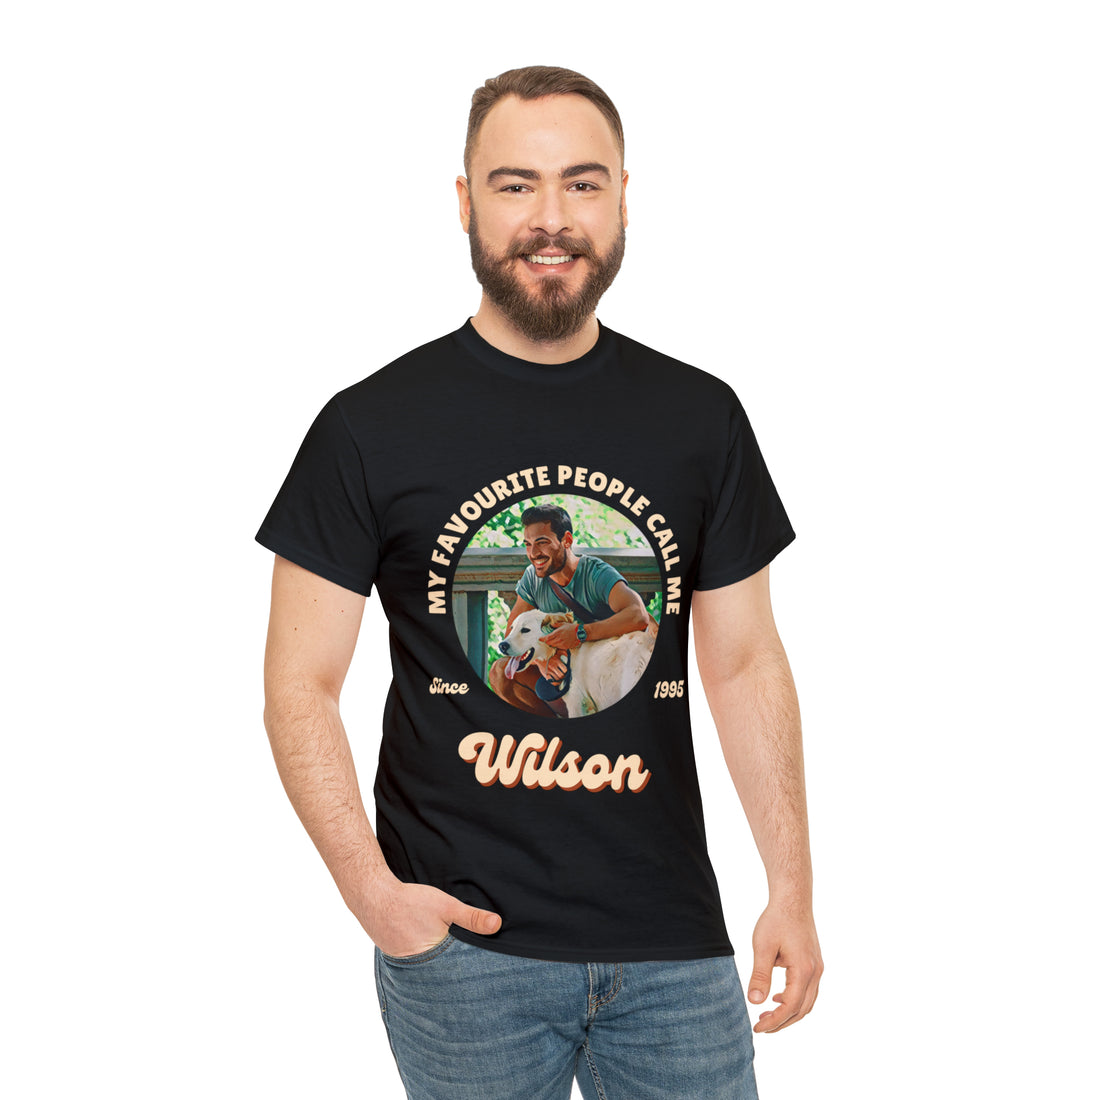 Customise Your Own Photo My Favourite People Call Me Unisex T-shirt, Personalised Insert Pet Image Tee Shirts, Friend Group, Couple, Anniversary Gifts